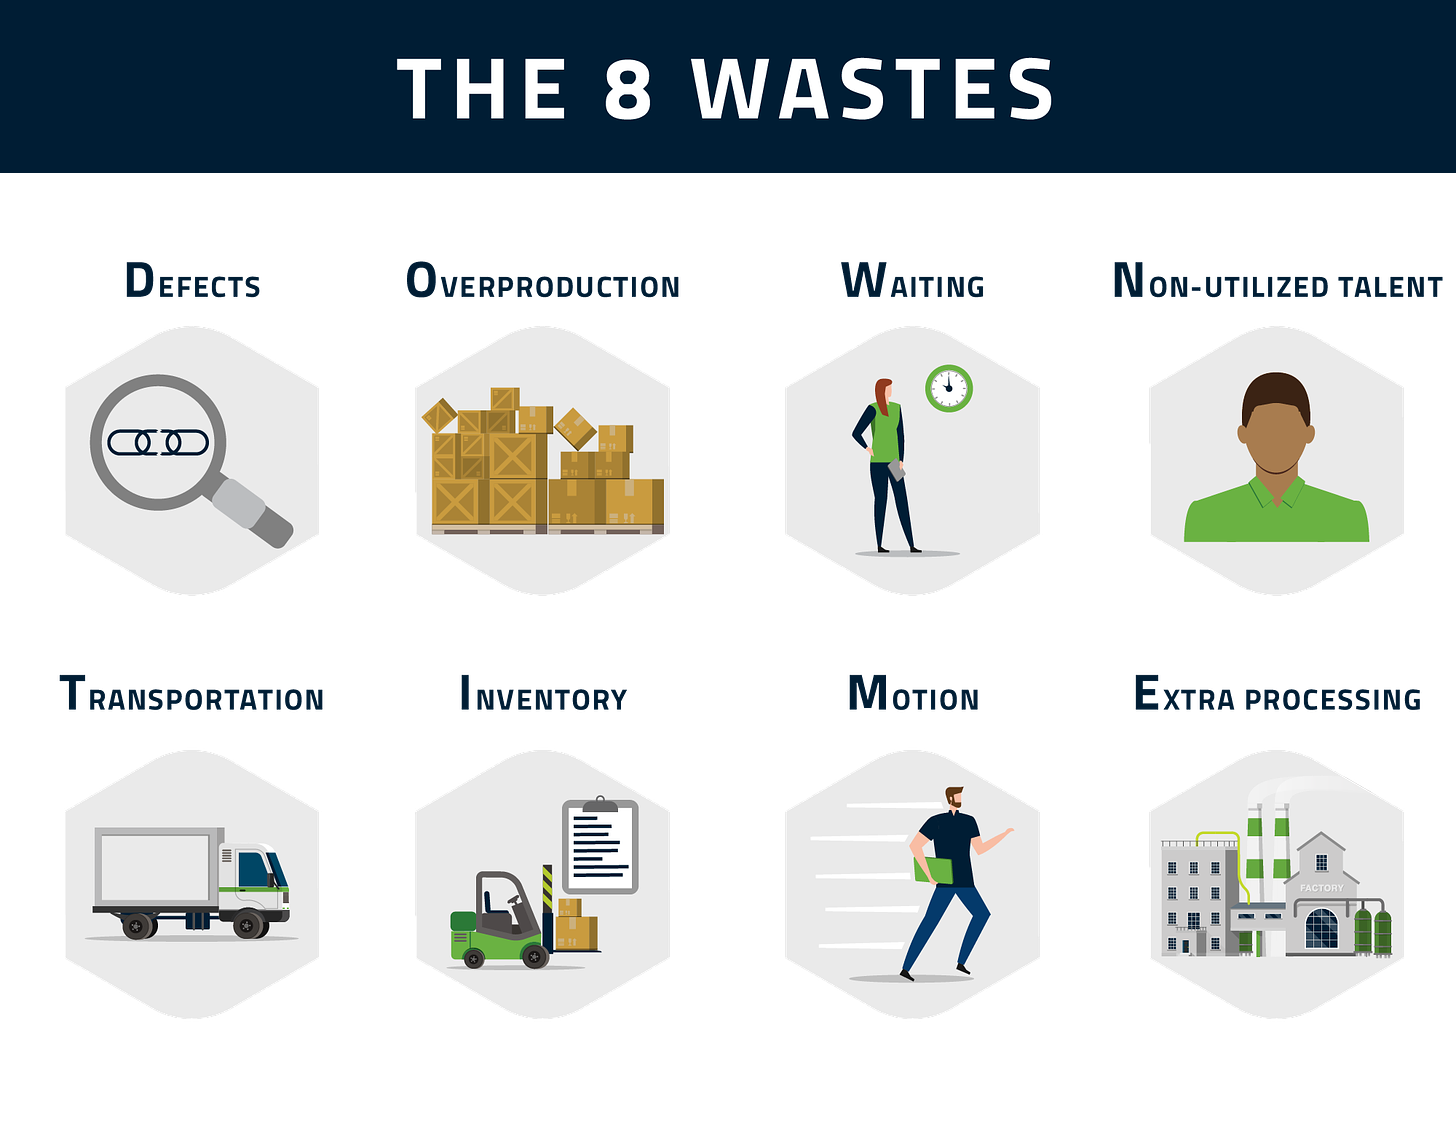 8 Wastes of Lean Manufacturing - TechSolve